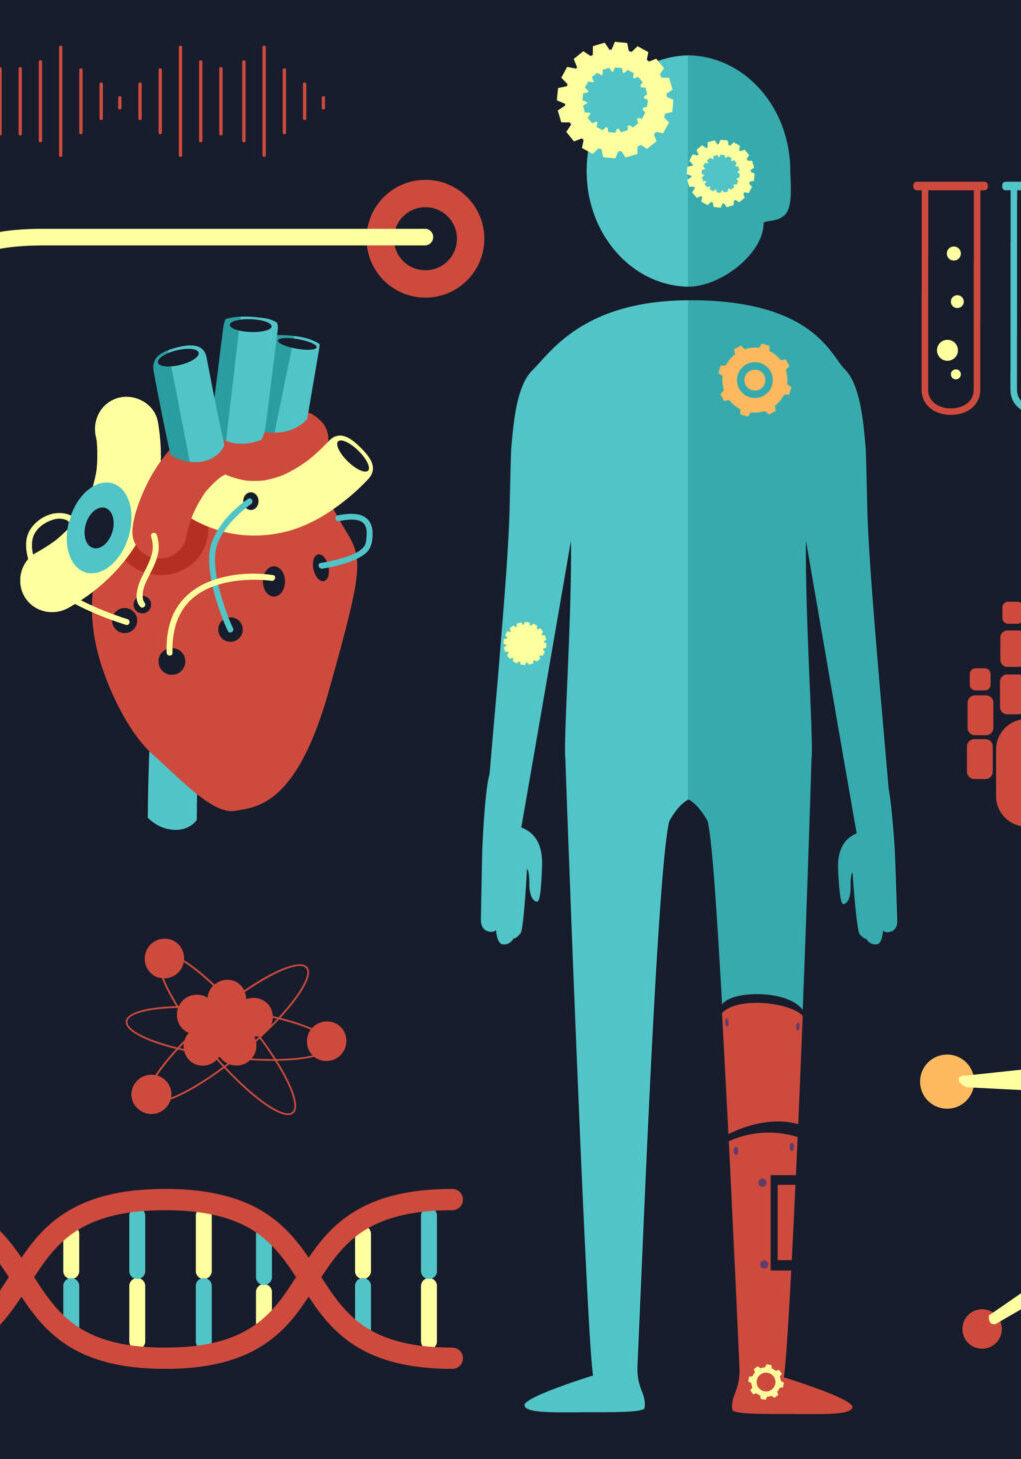 Illustration of Biomedical Engineering Elements like DNA, Man, Heart and Stethoscope